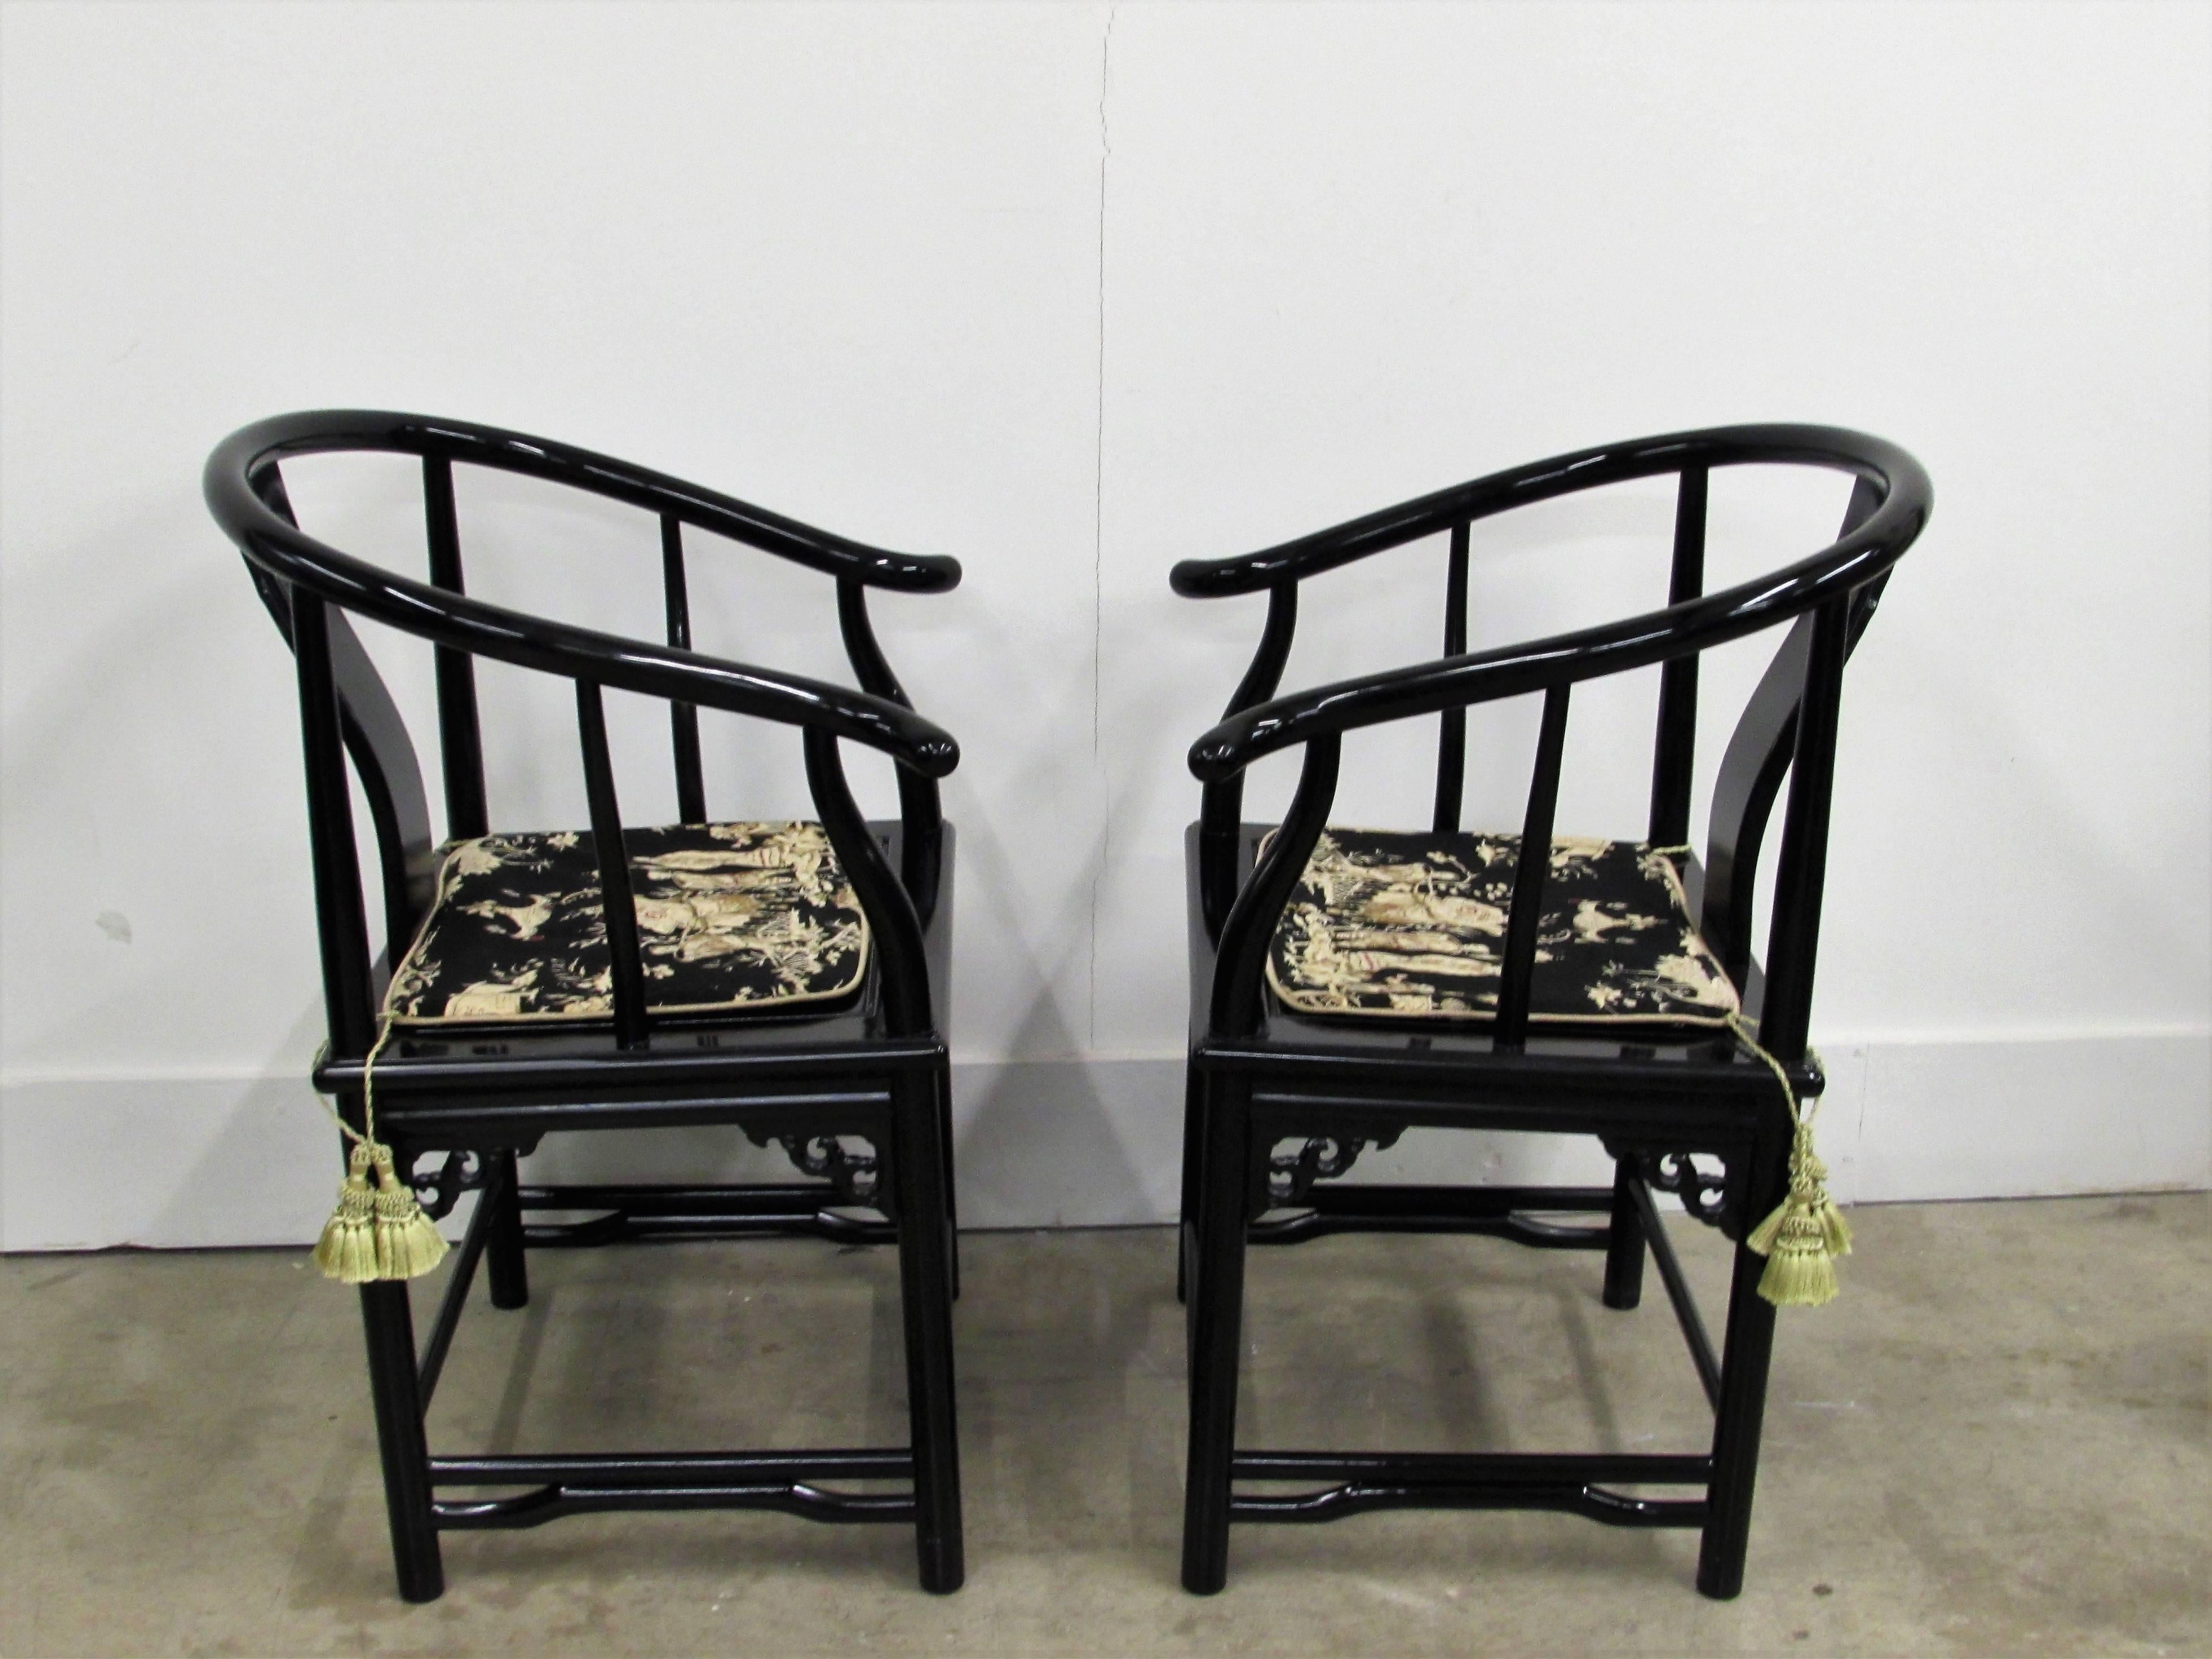 Black Lacquer Asian Horseshoe Arm Chairs with slat back and chinoiserie symbol, seat cushion is Asian hand-painted toile in black &cream fabric with gold tassels. Hand-carved corners in elmwood under lacquer.
 